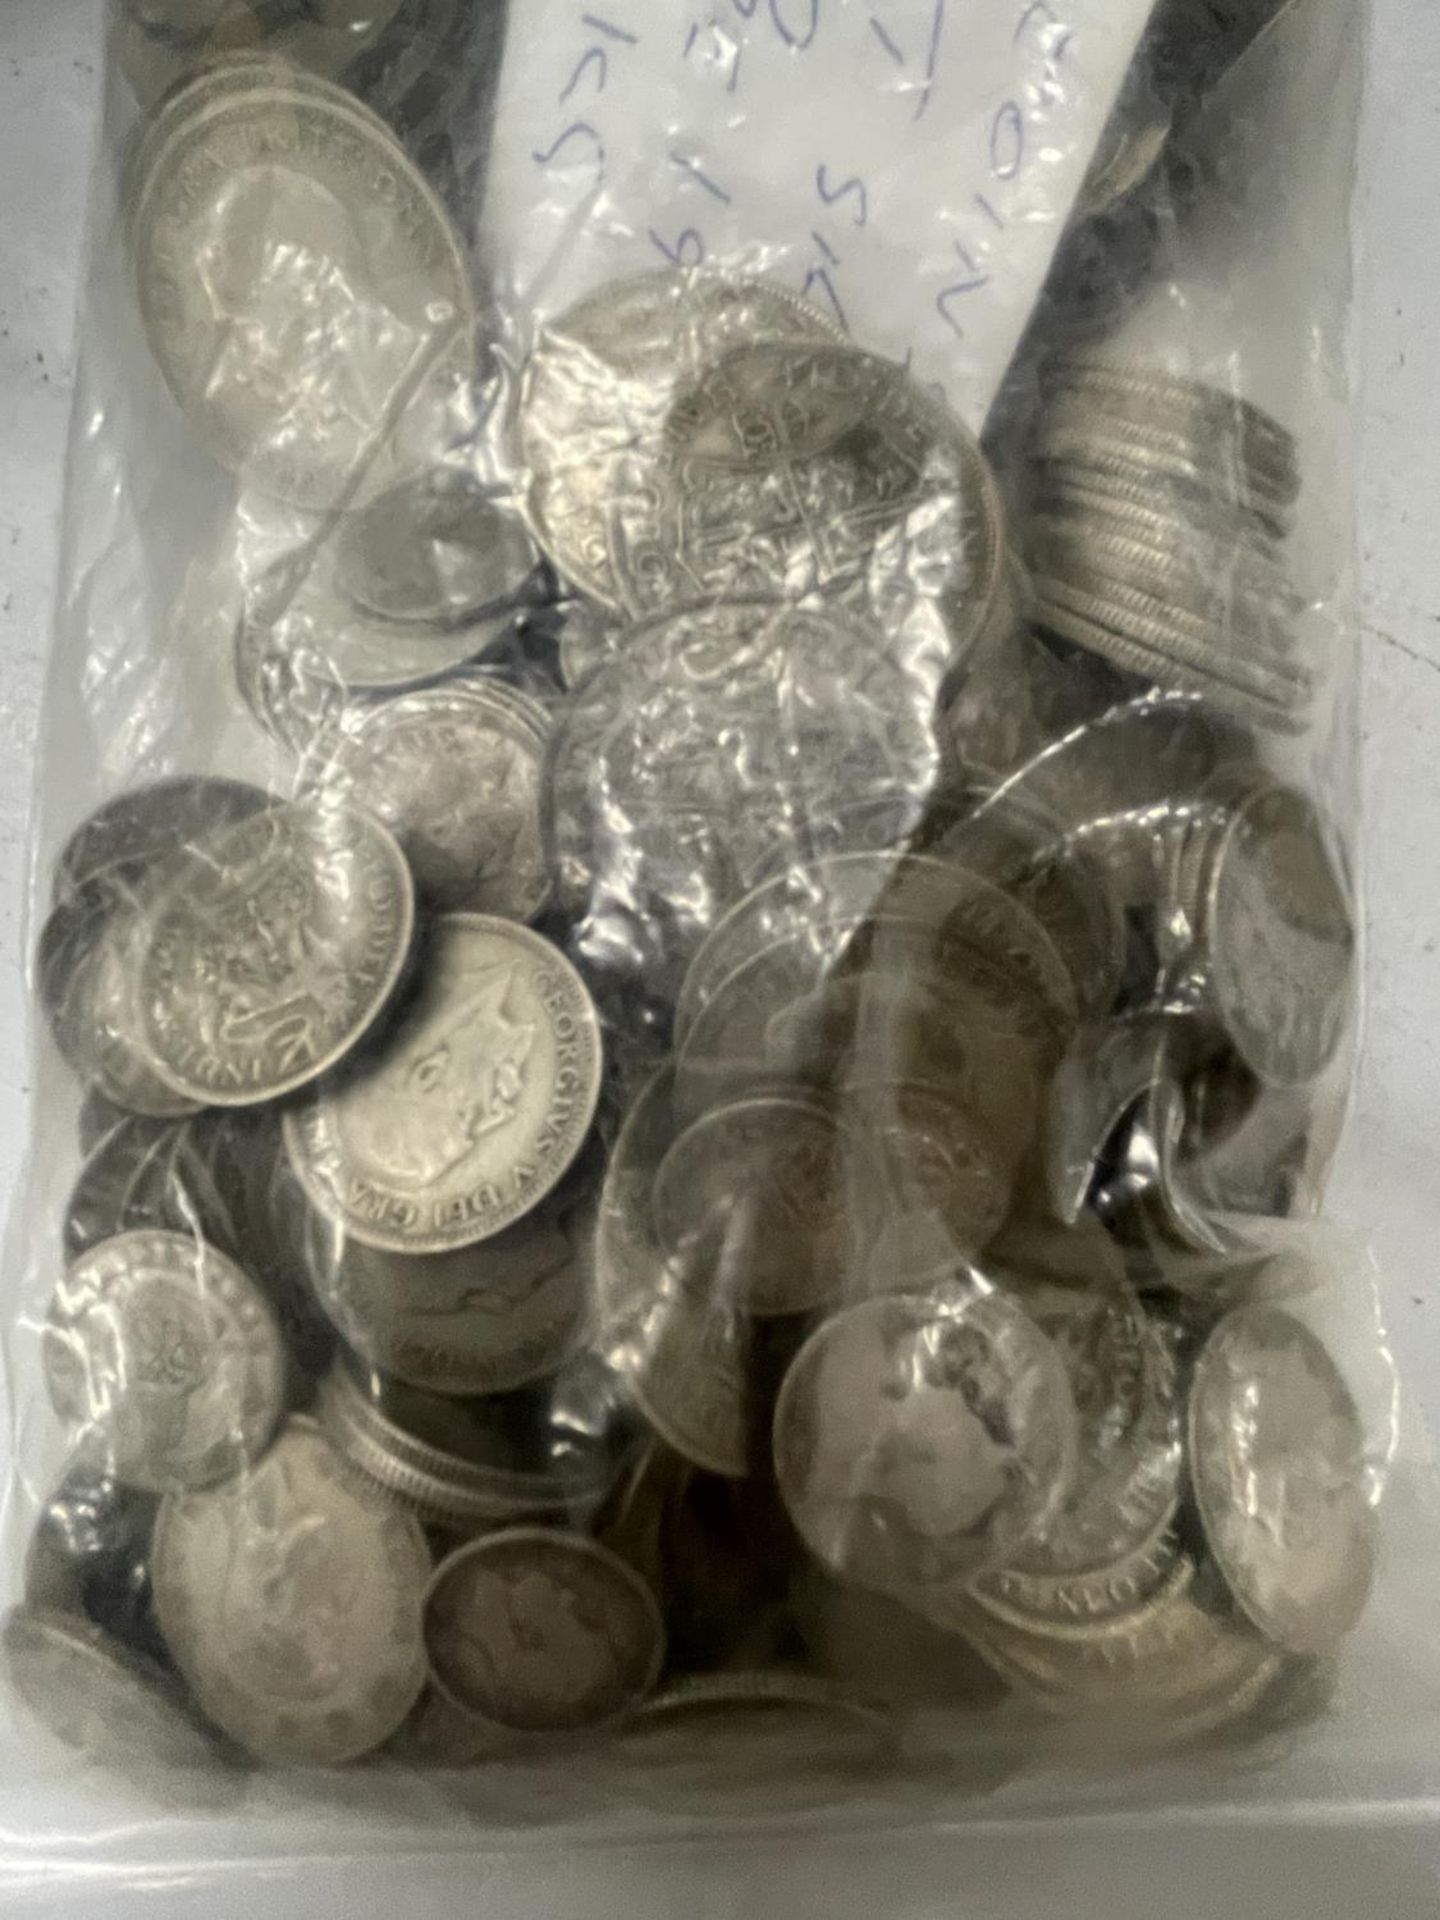 APPROX 300 PRE 1947 GB SILVER COINS TO INCLUDE HALF CROWNS, SHILLINGS, FLORINS, ETC - IN TOTAL 1. - Image 2 of 3